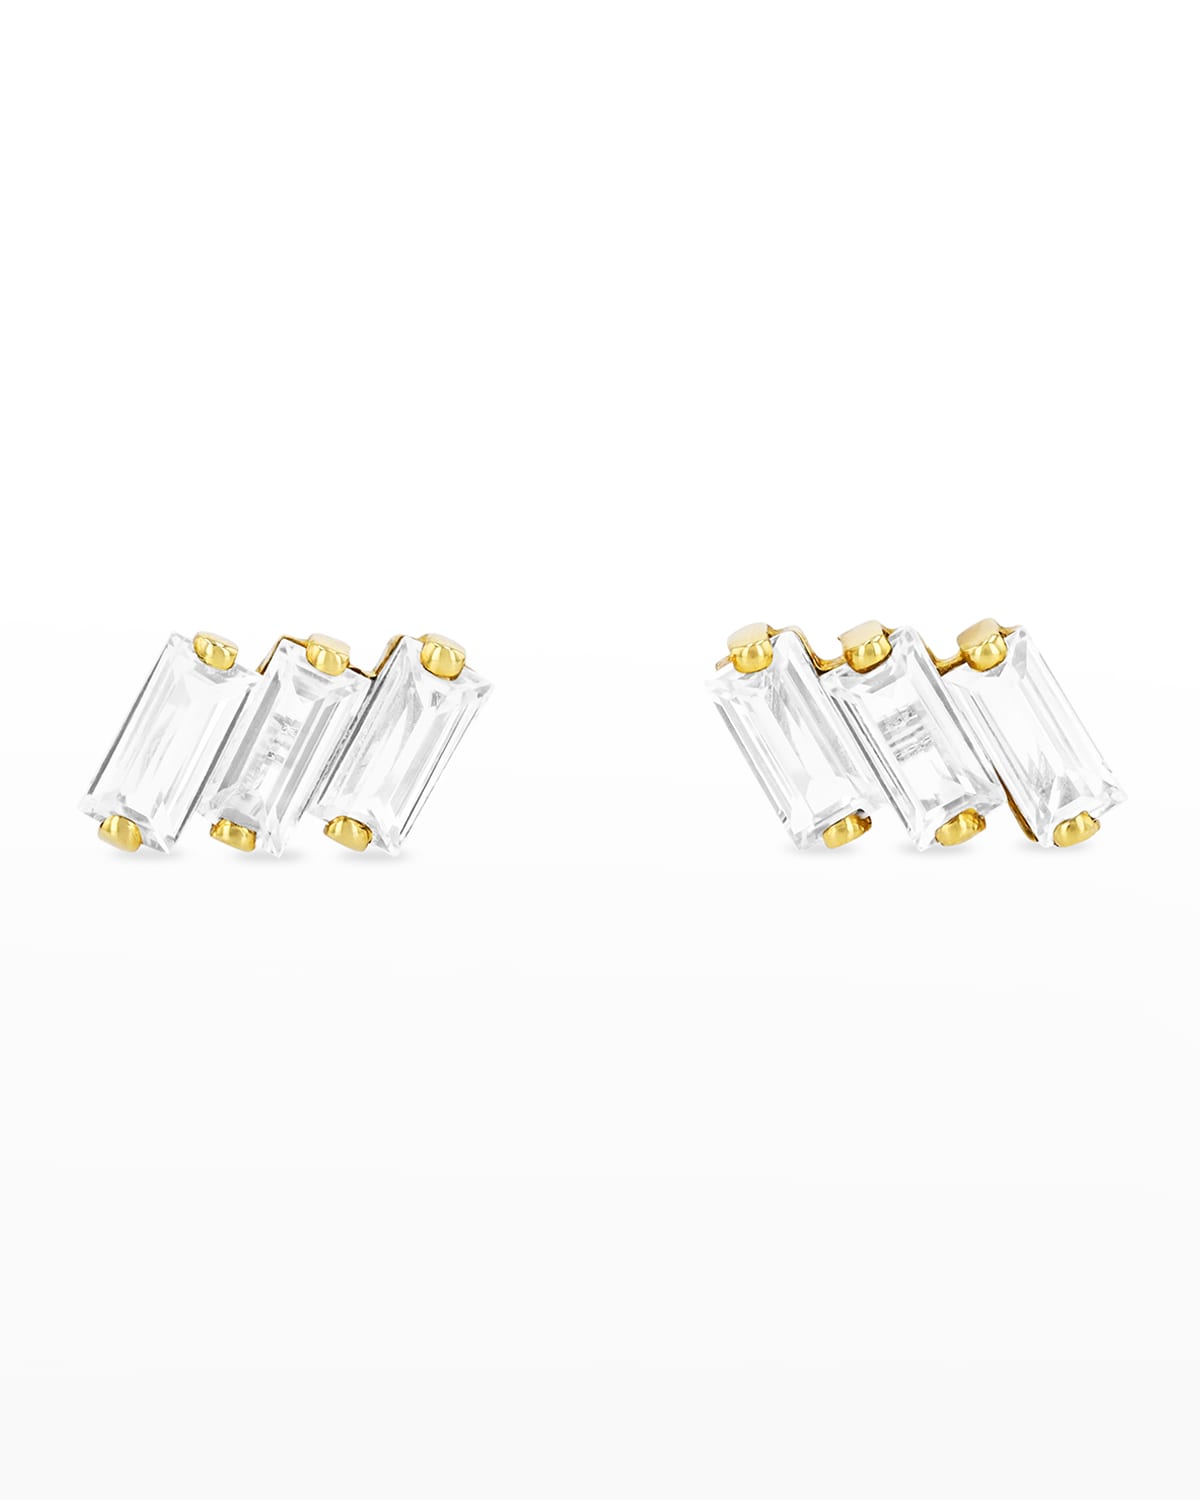 KALAN by Suzanne Kalan 14K Gold Three Baguette Earrings with Baguette-Cut White Topaz